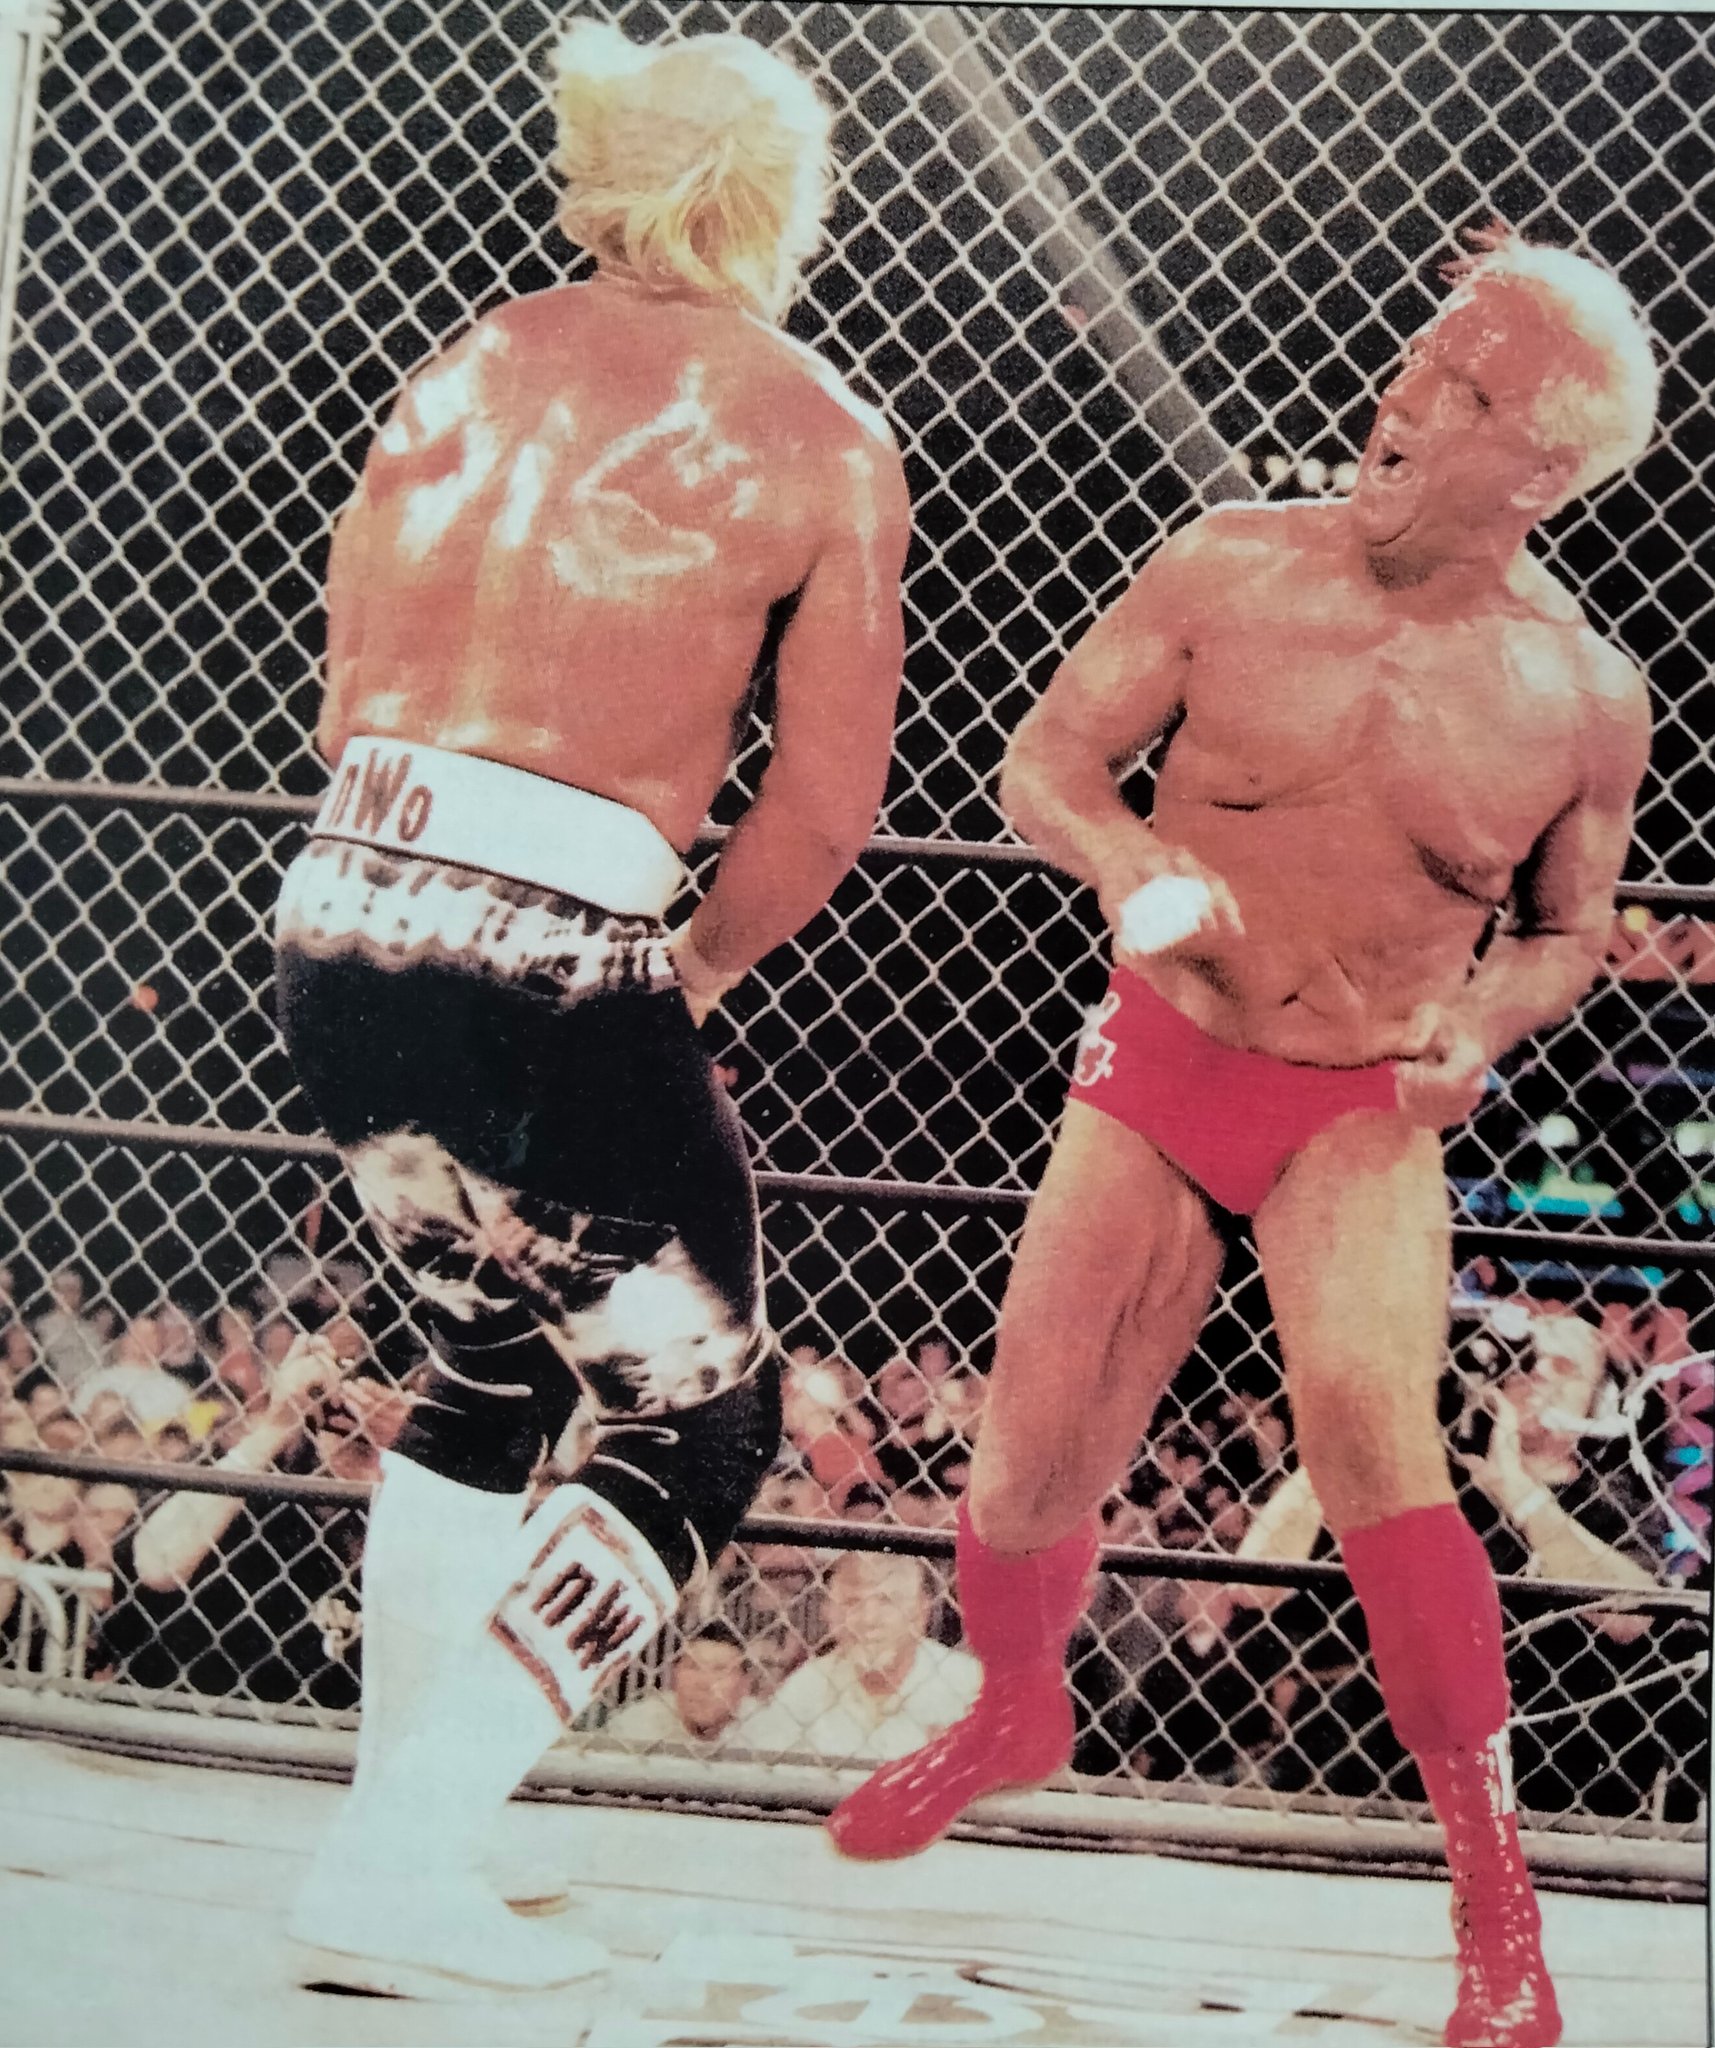 Rasslin' History 101 on Twitter: "Ric Flair and WCW World Heavyweight Champion Hollywood Hogan battle in a Barbed Wire Steel Cage First Blood match for the WCW World Title at Uncensored '99